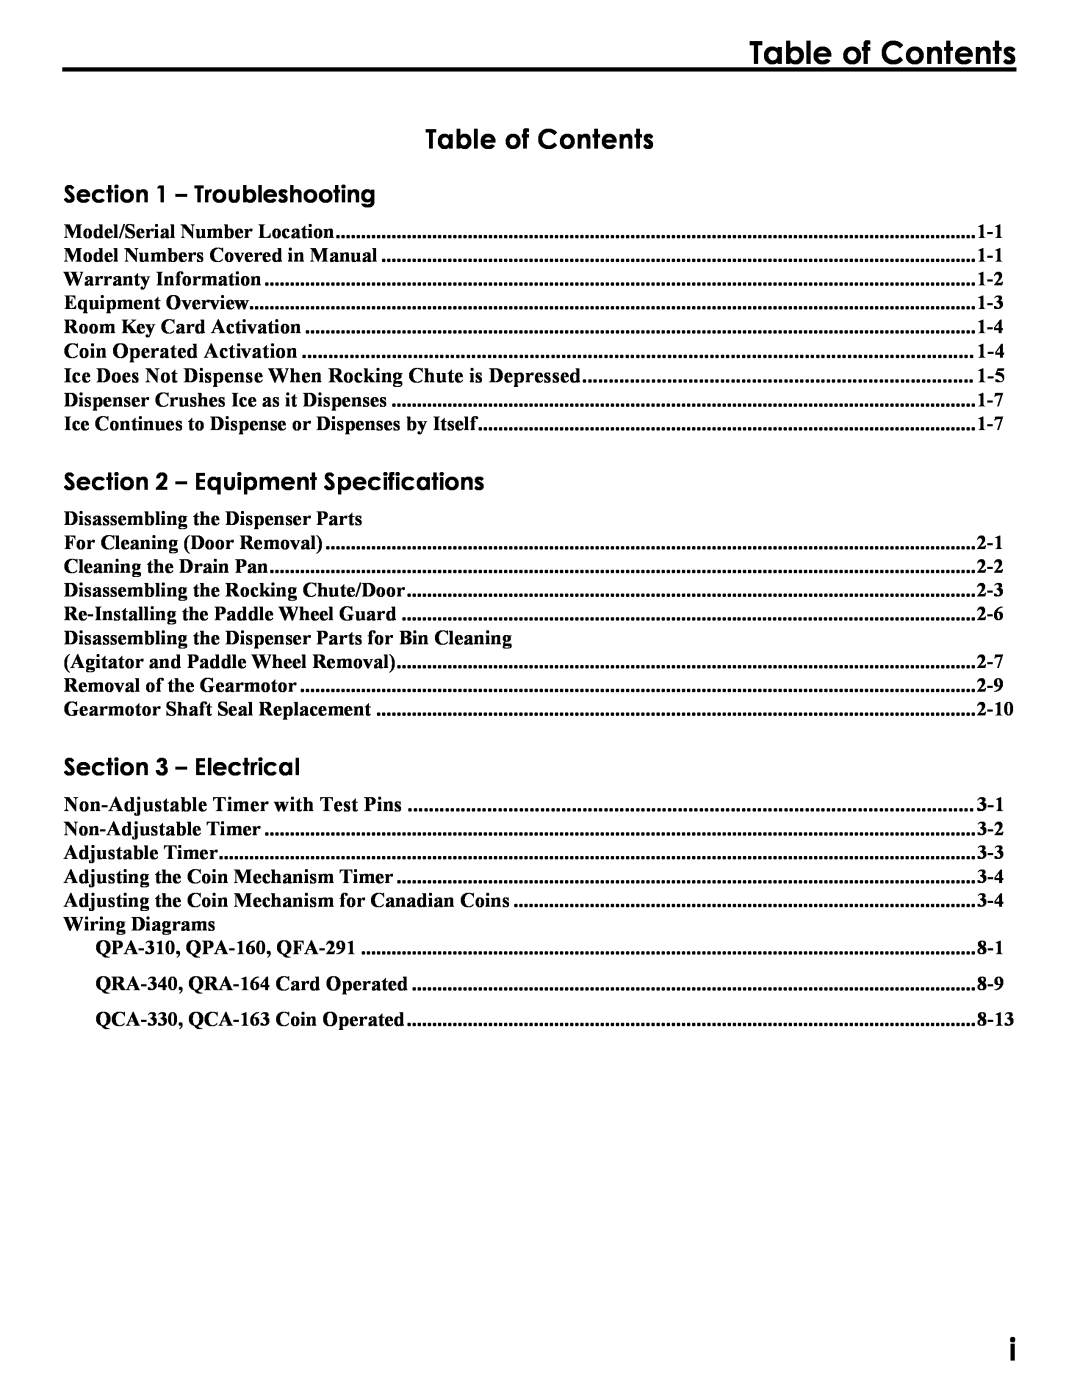 Manitowoc Ice Q290, Q160, Q300 service manual Table of Contents, Troubleshooting, Equipment Specifications, Electrical 